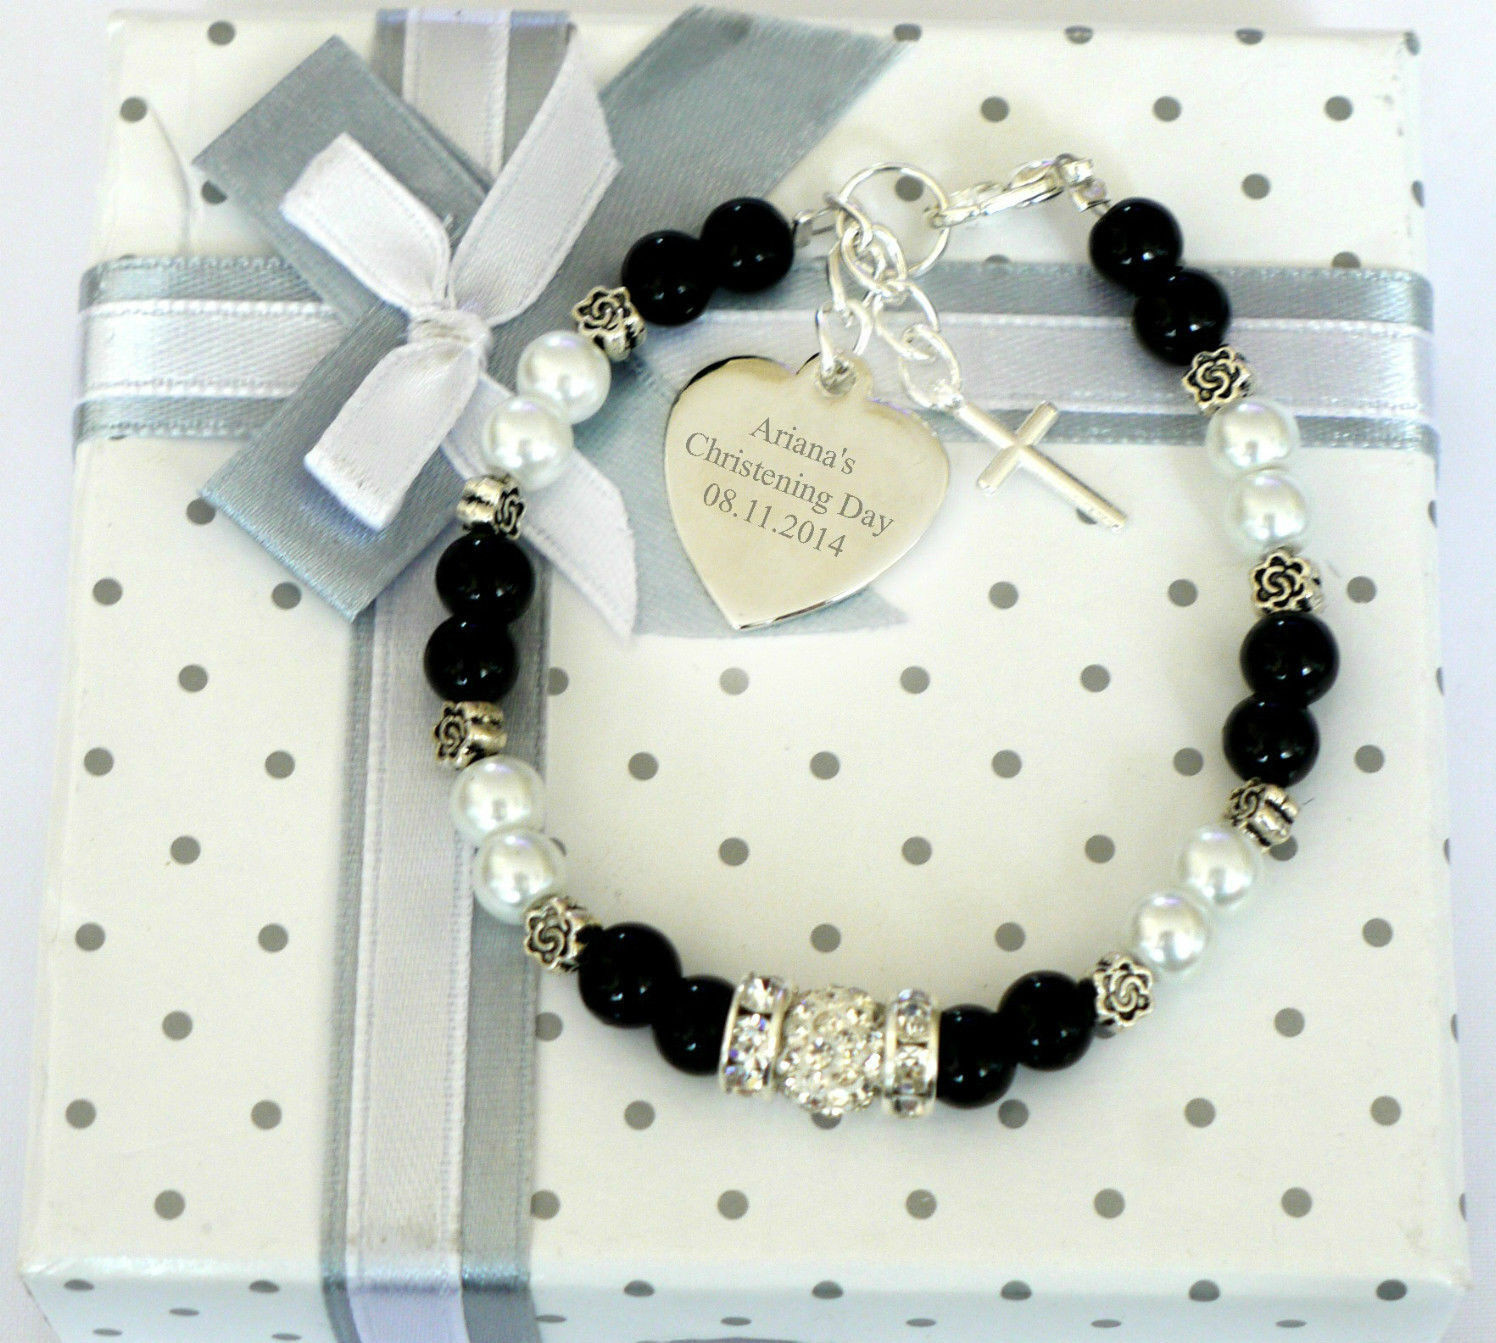 Baptism Gift Ideas For Girls
 Top 10 Christening Gifts for Girls